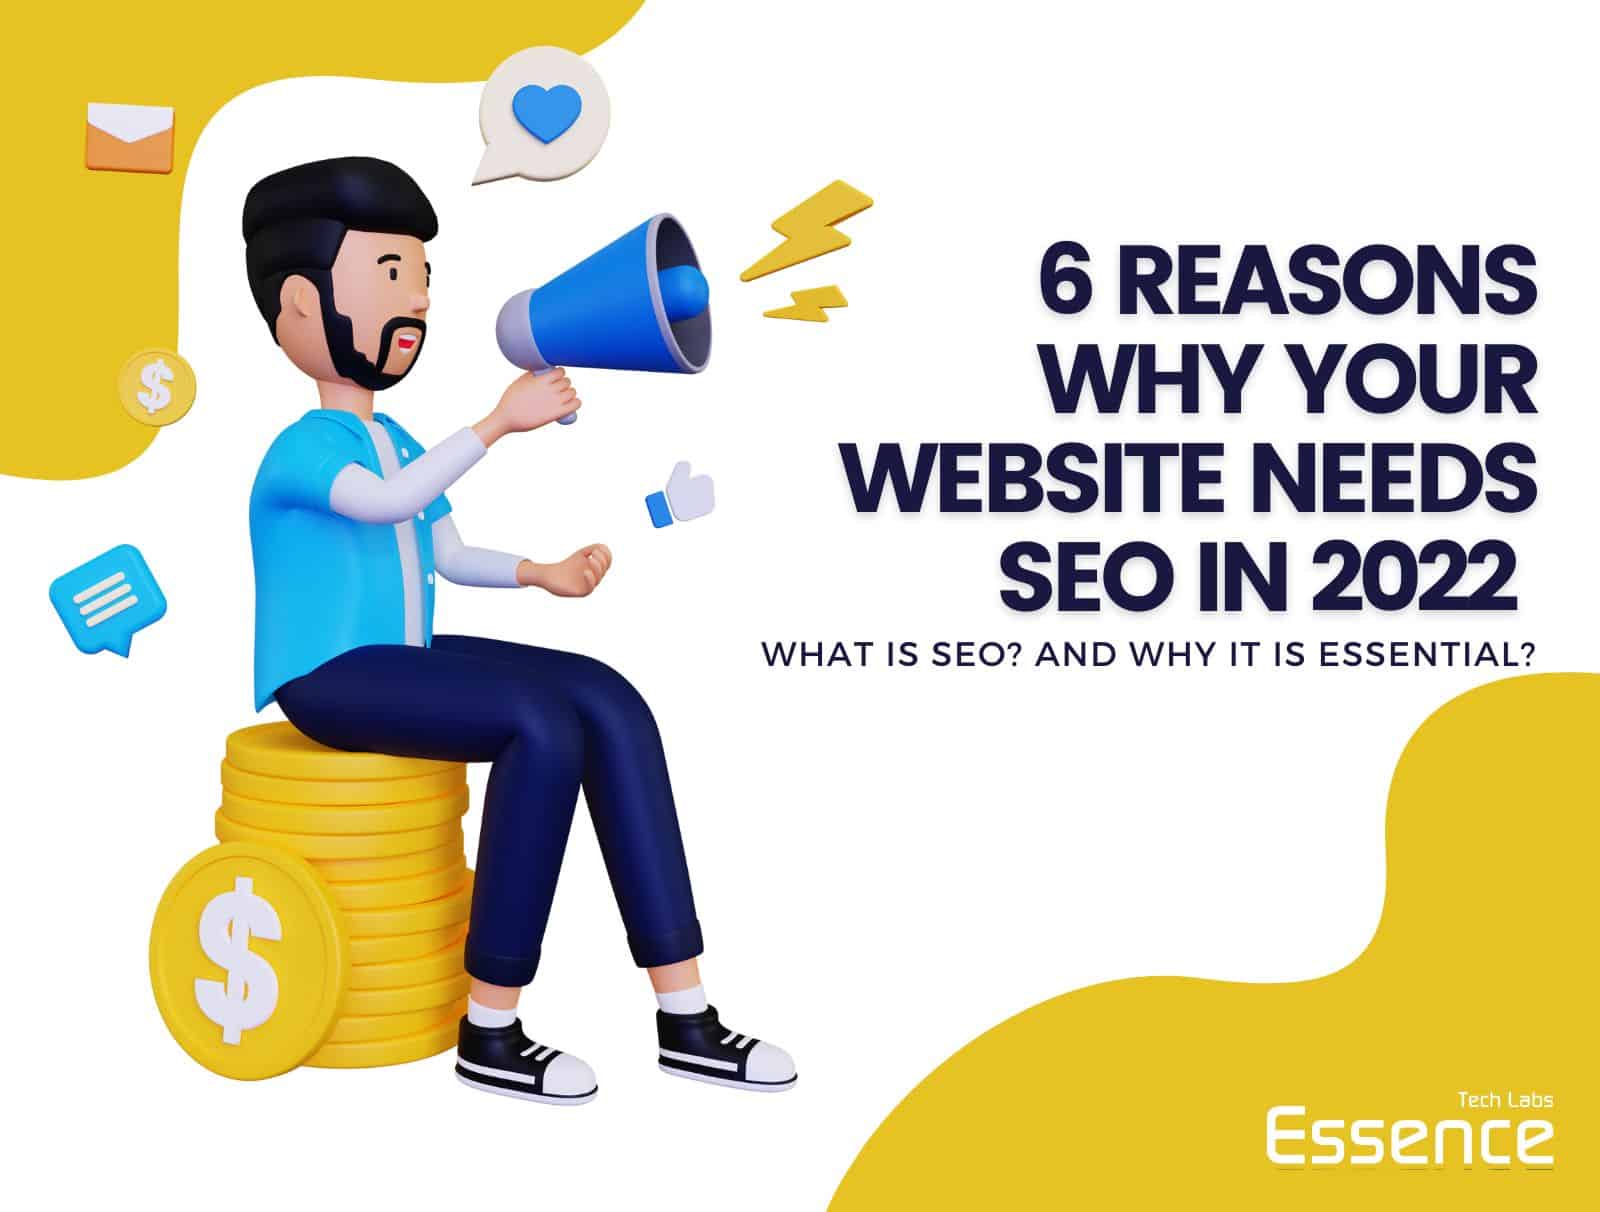 6 Reasons why your business needs SEO